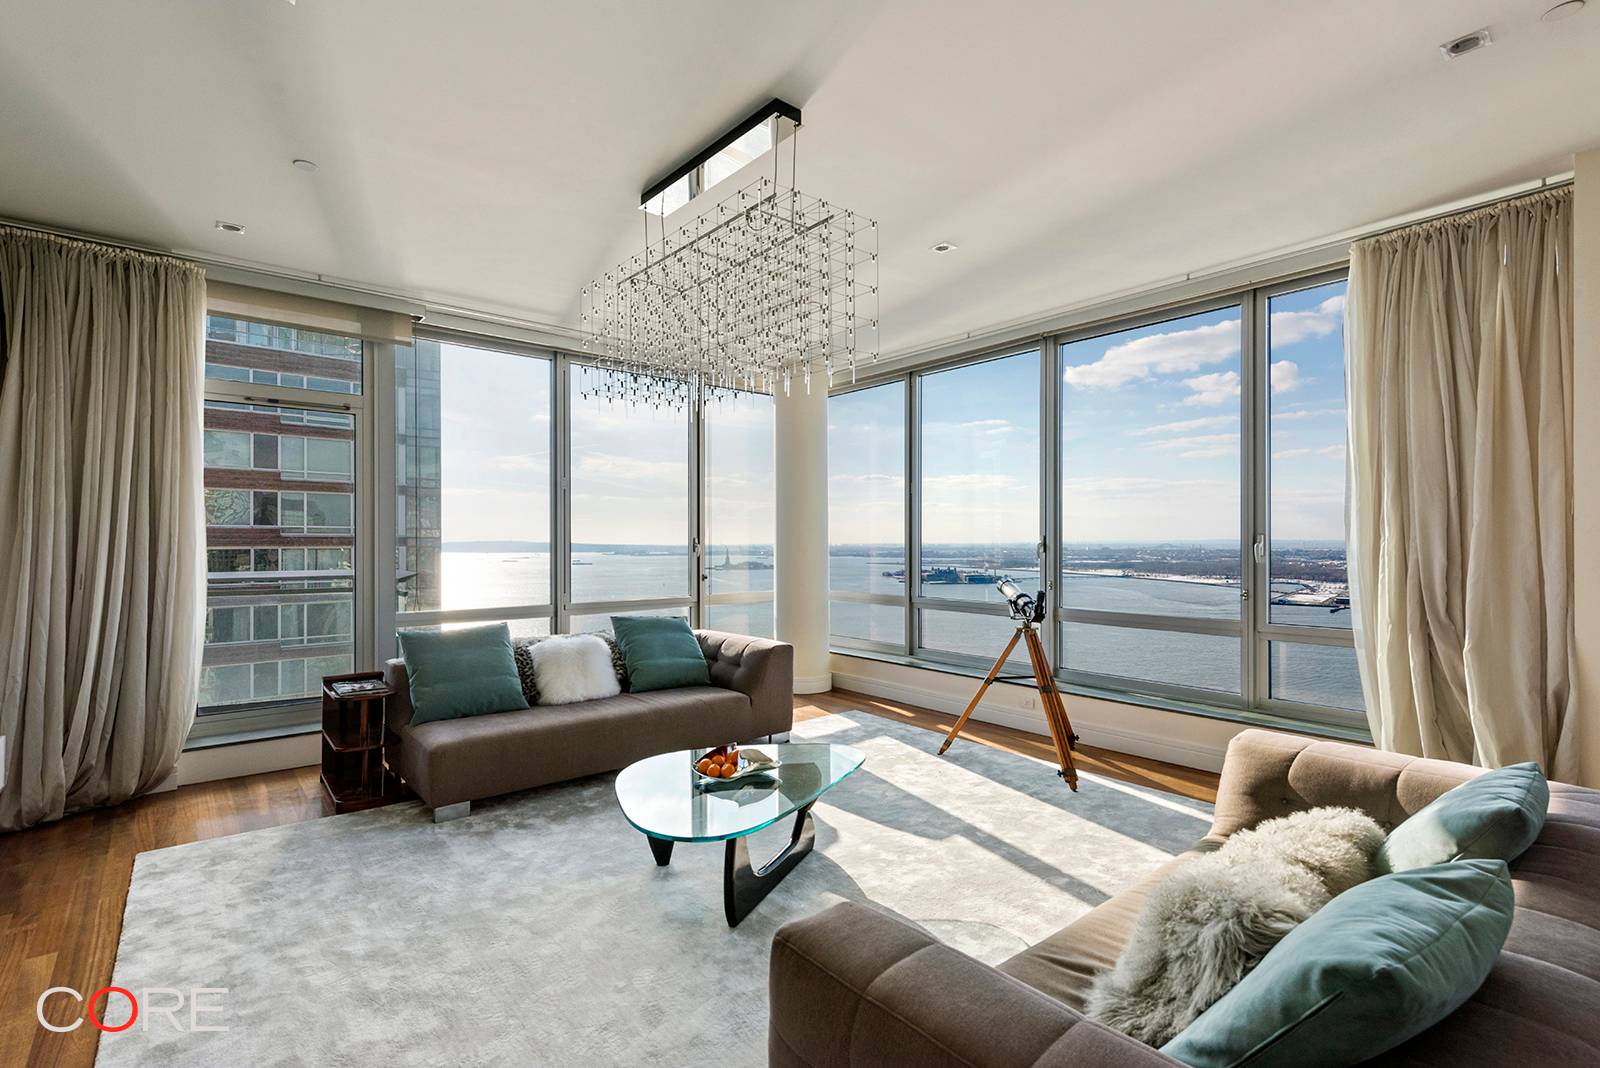 Sensational top floor southwest facing, corner penthouse with spectacular panoramic views of the Hudson River and Statue of Liberty from every room and your own private balcony.